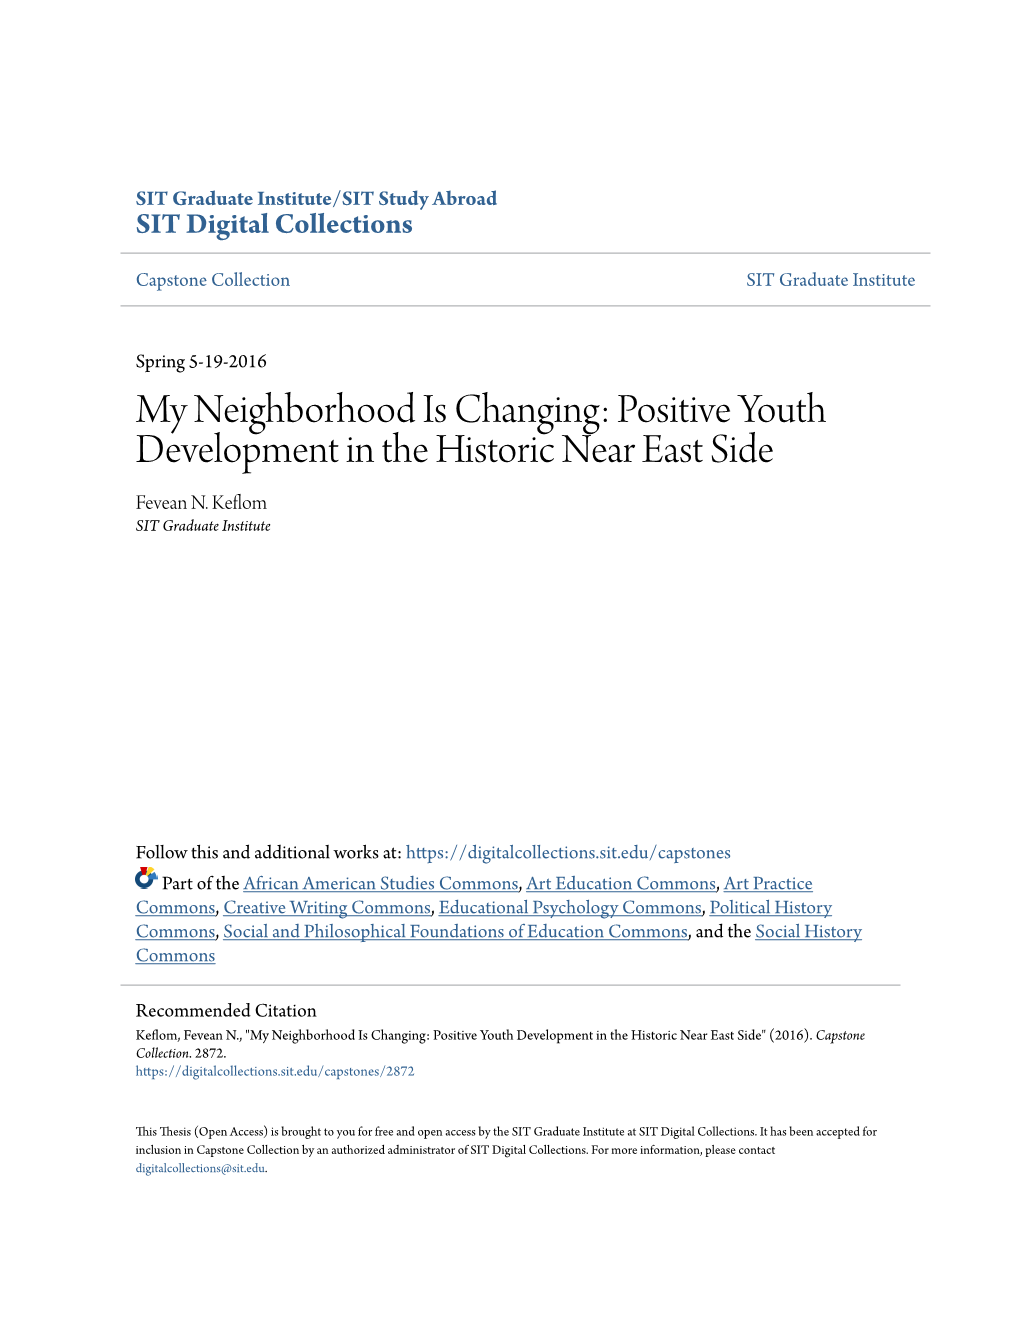 Positive Youth Development in the Historic Near East Side Fevean N